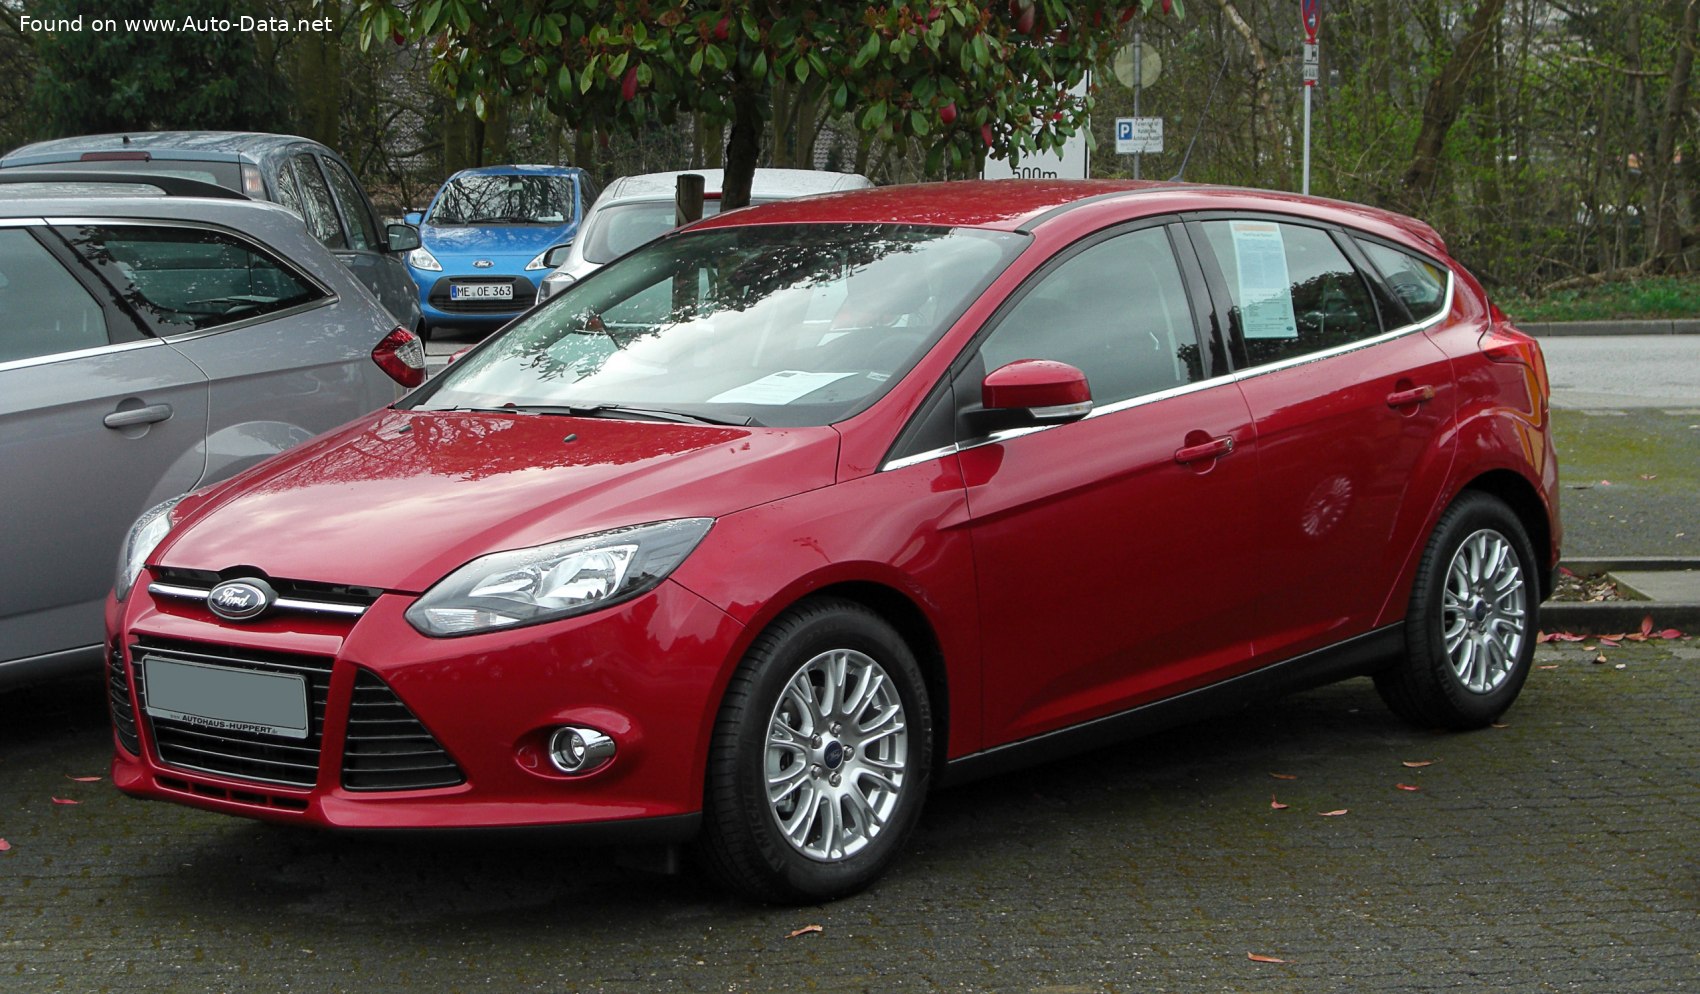 2013 Ford Focus III Hatchback | Technical Specs, Fuel consumption ...